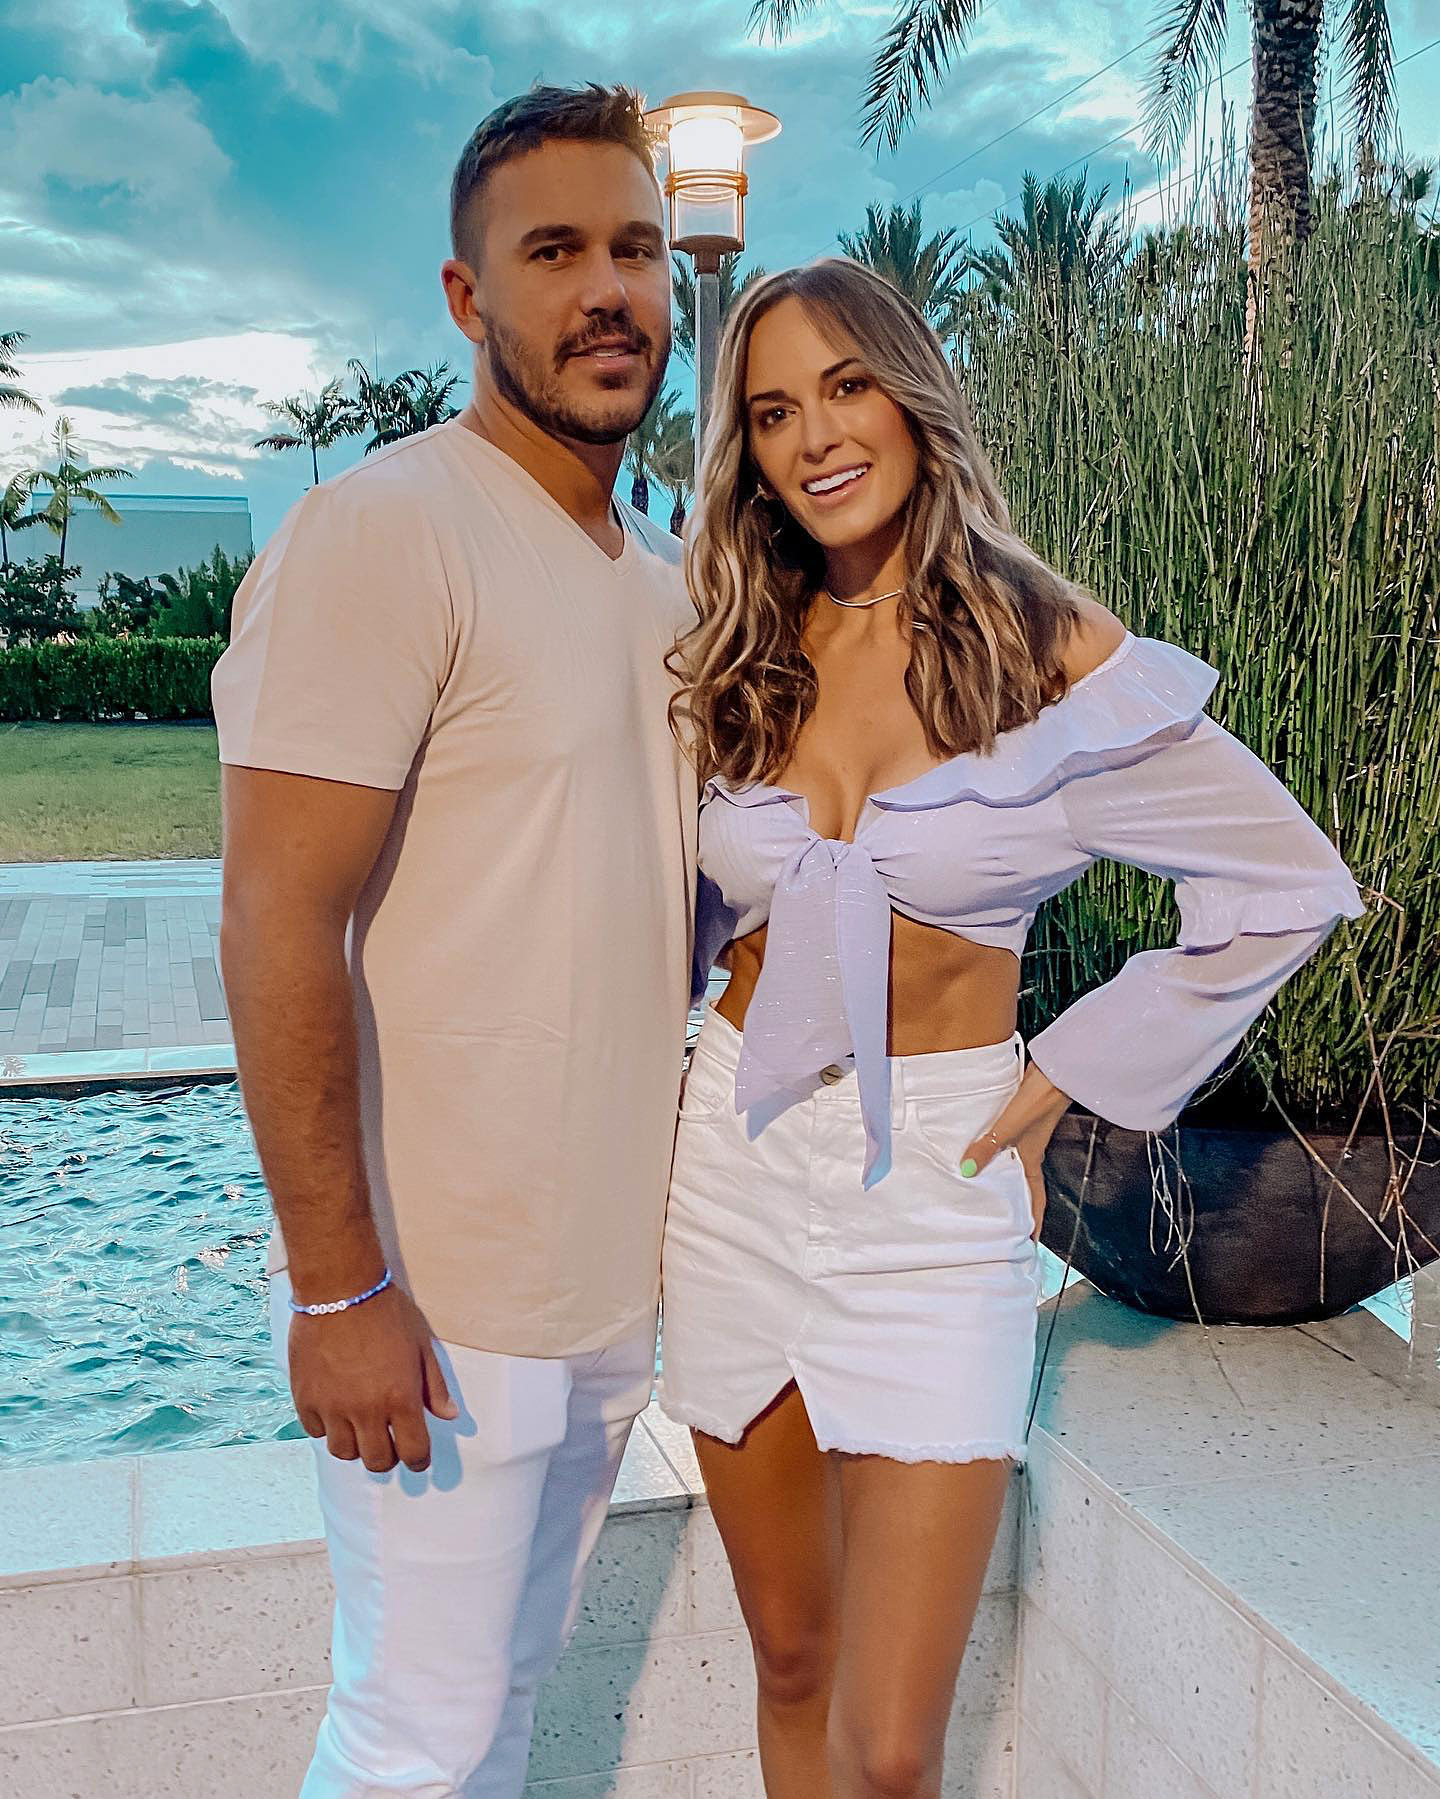 Golfer Brooks Koepka And Jena Sims A Love Story In The Making